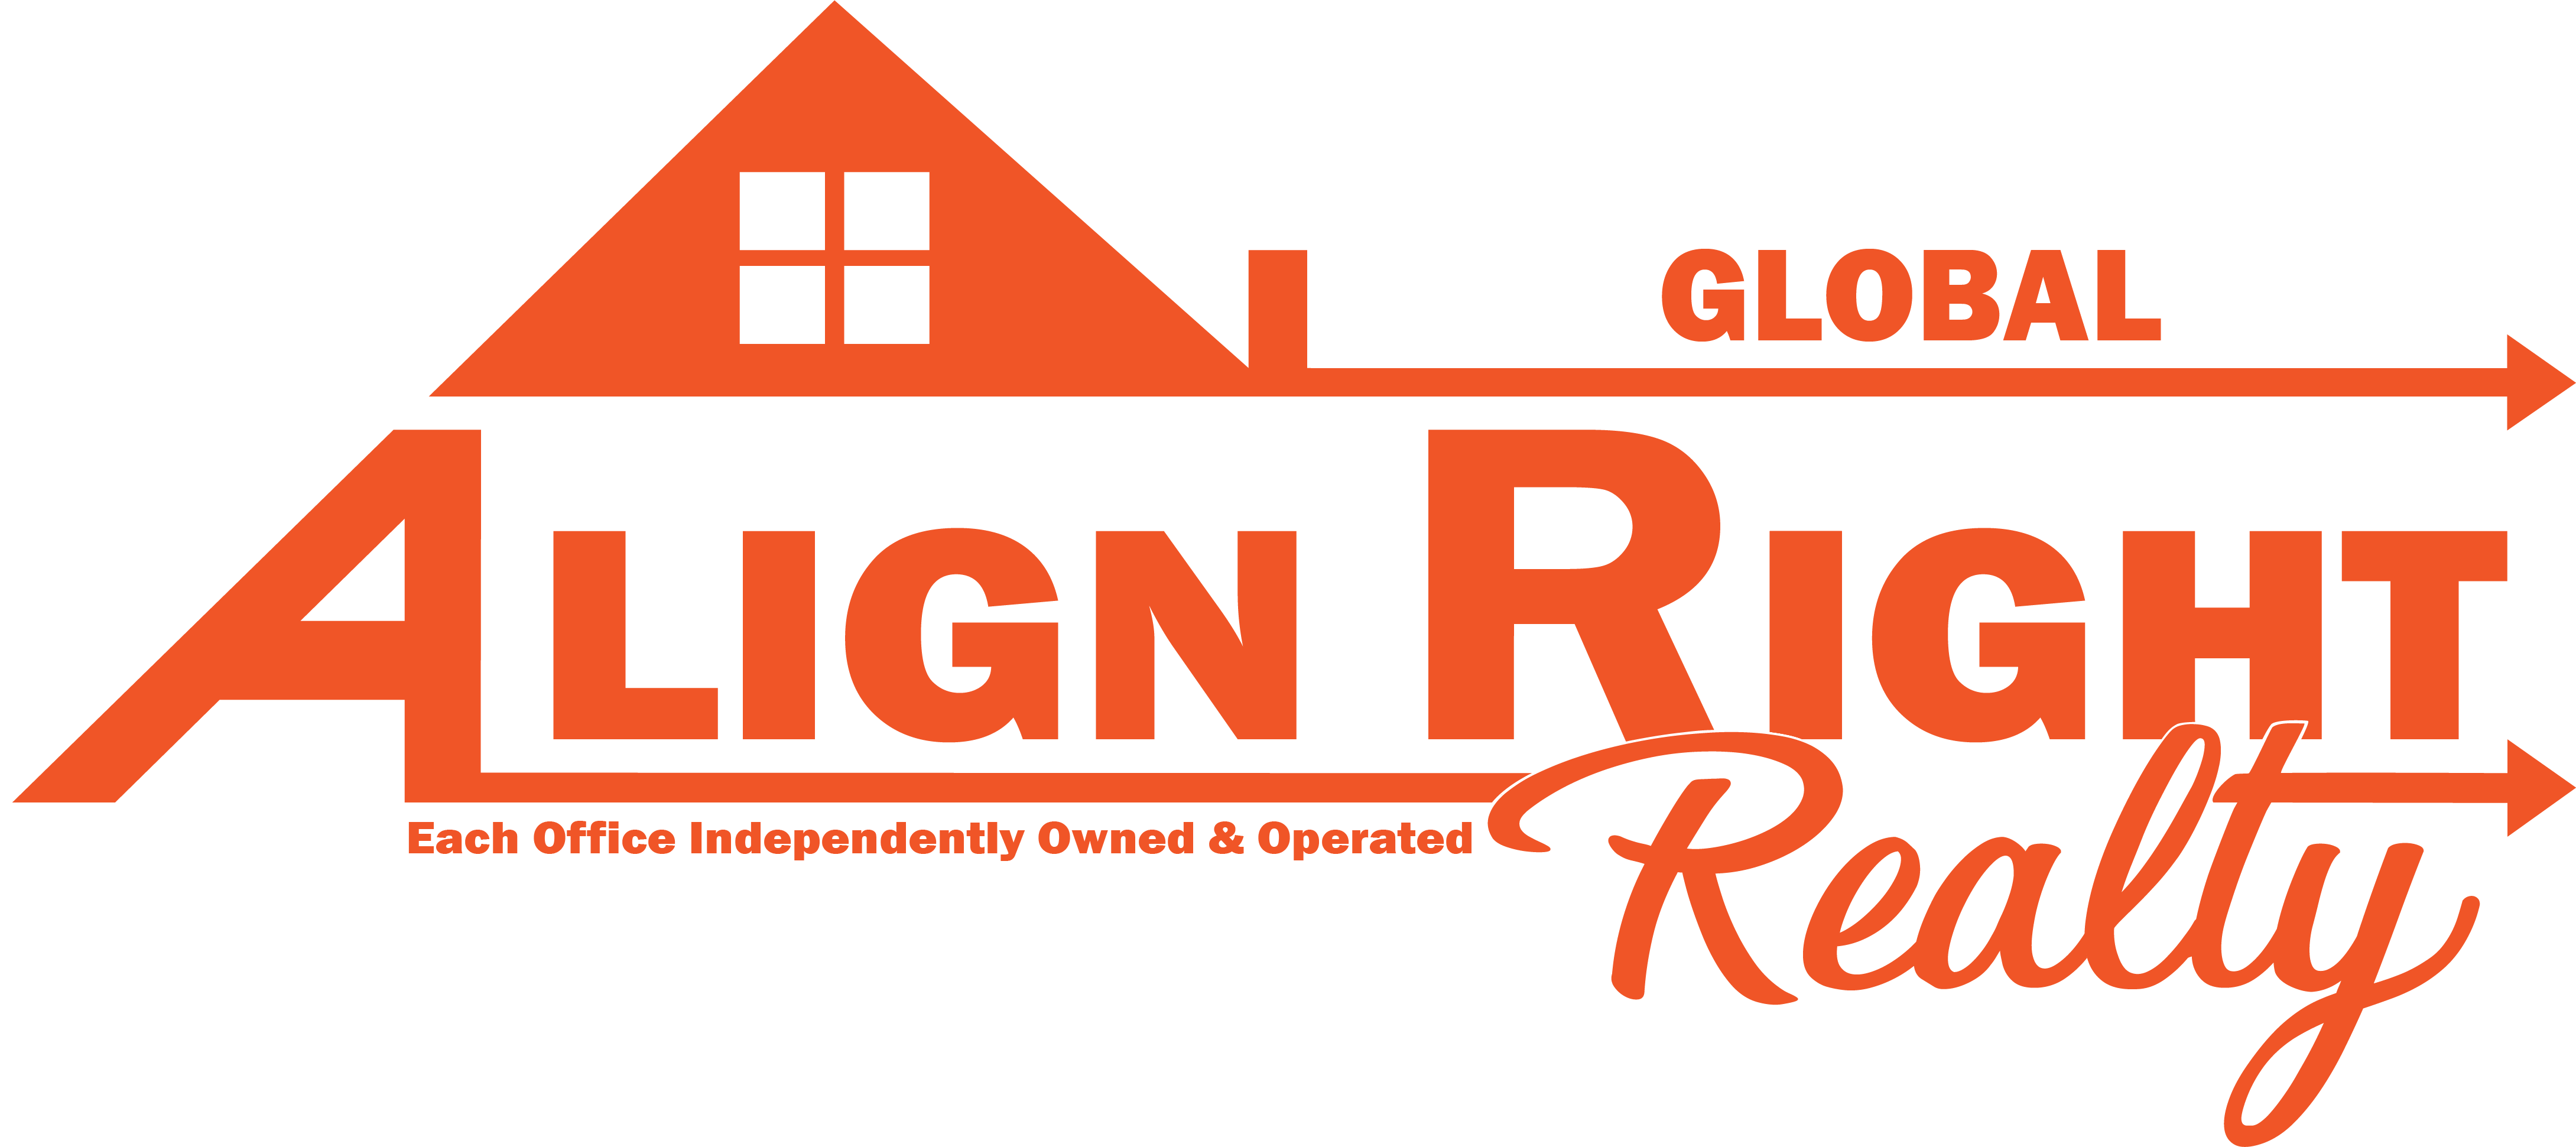 Align Right Realty Global